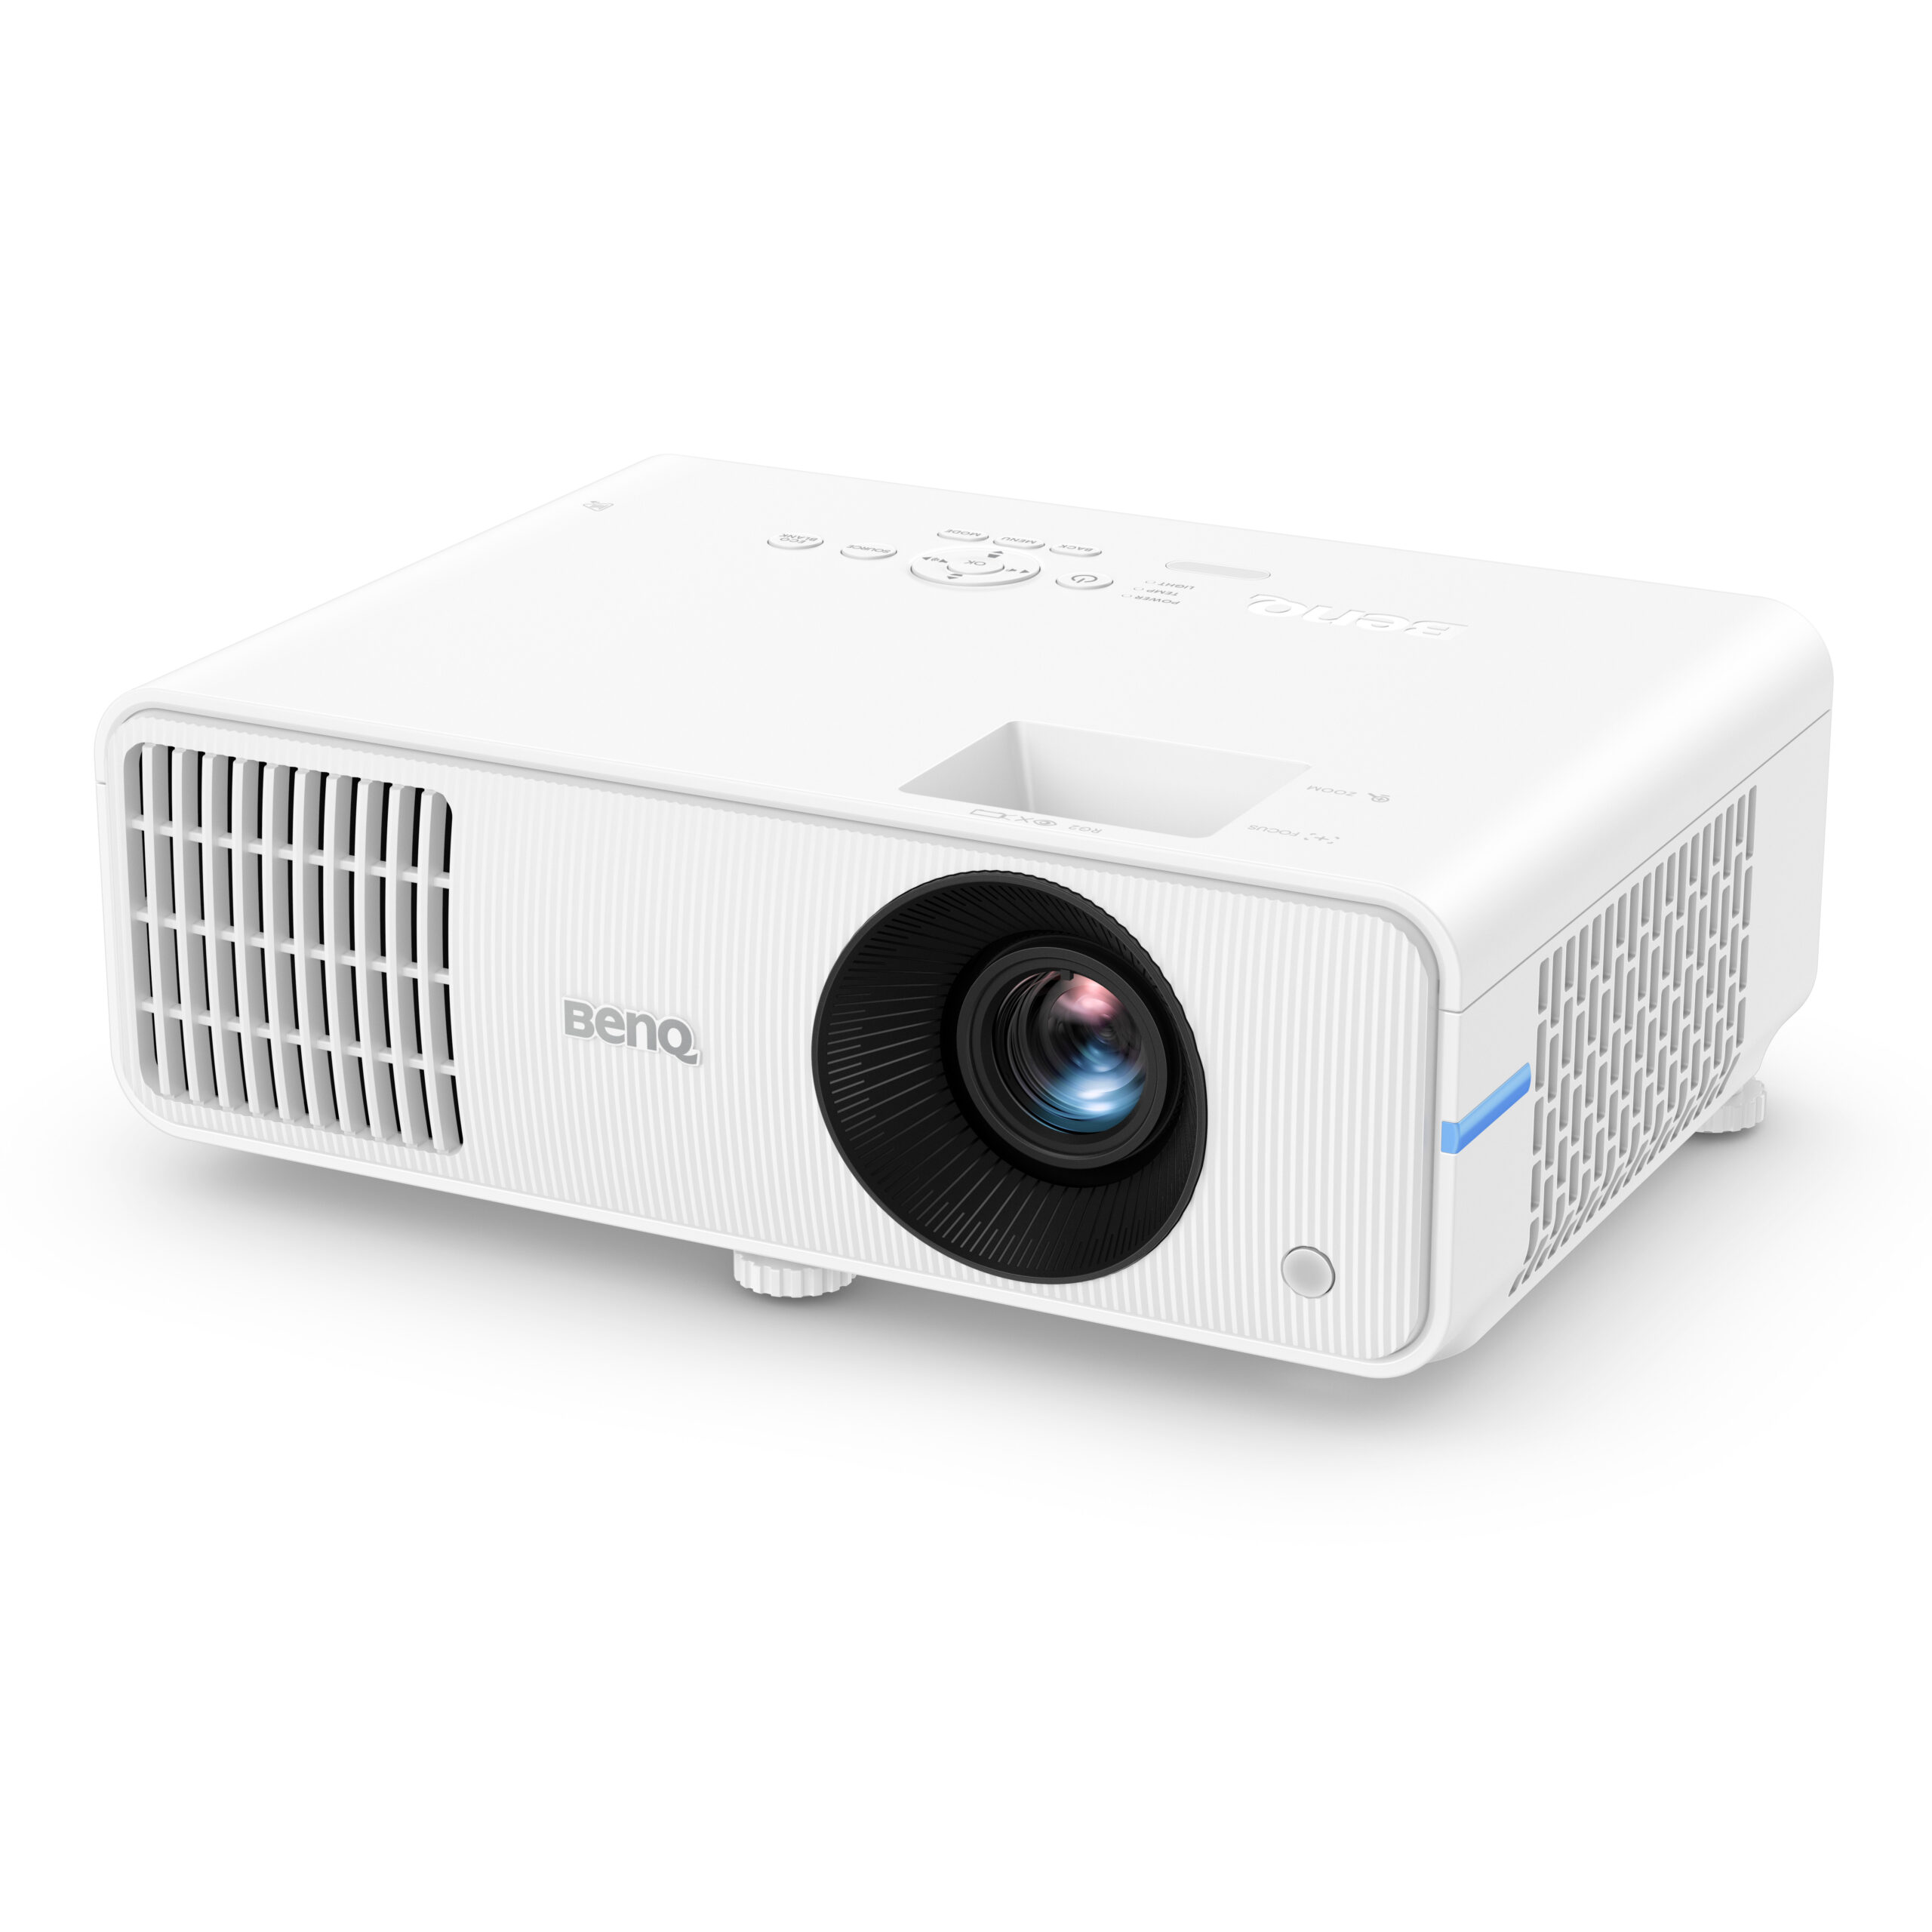 BenQ LH650: A Sustainable, High-Resolution Projector for Classrooms